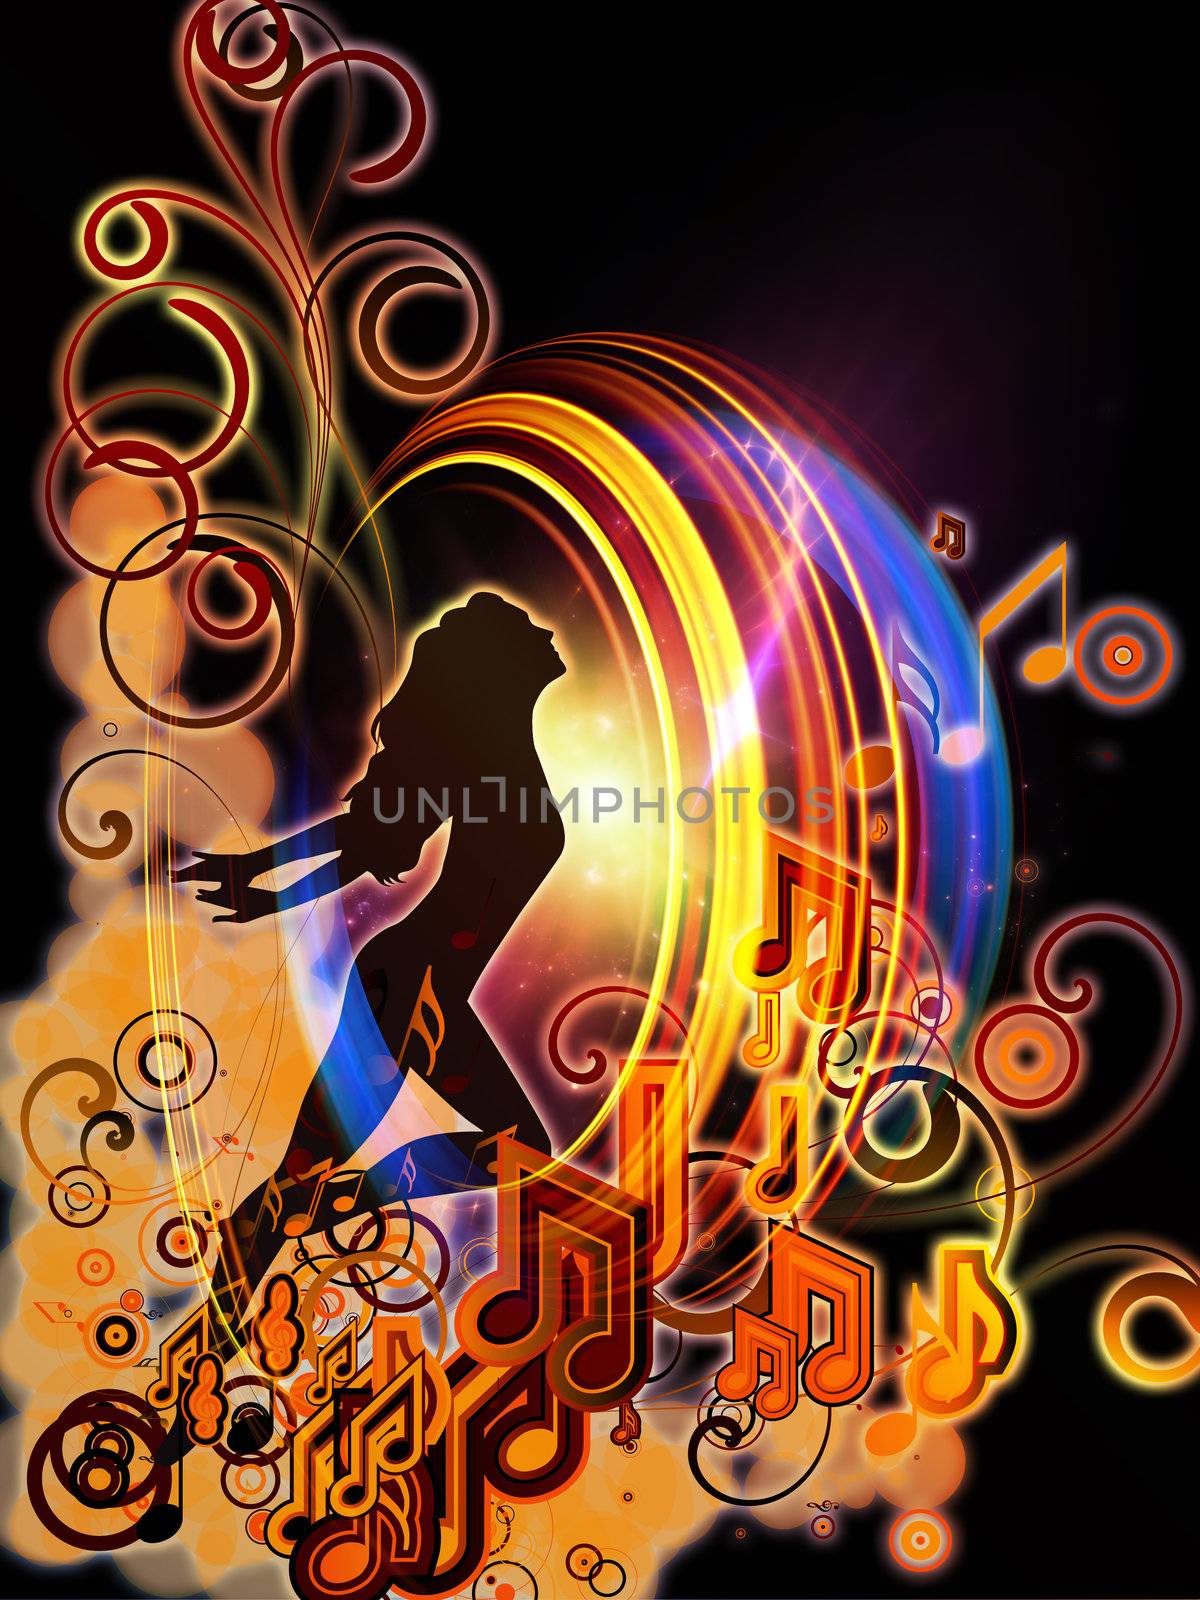 Backdrop of  girl silhouette, notes, lights and abstract design elements to complement your design on the subject of music, song, performance and dance